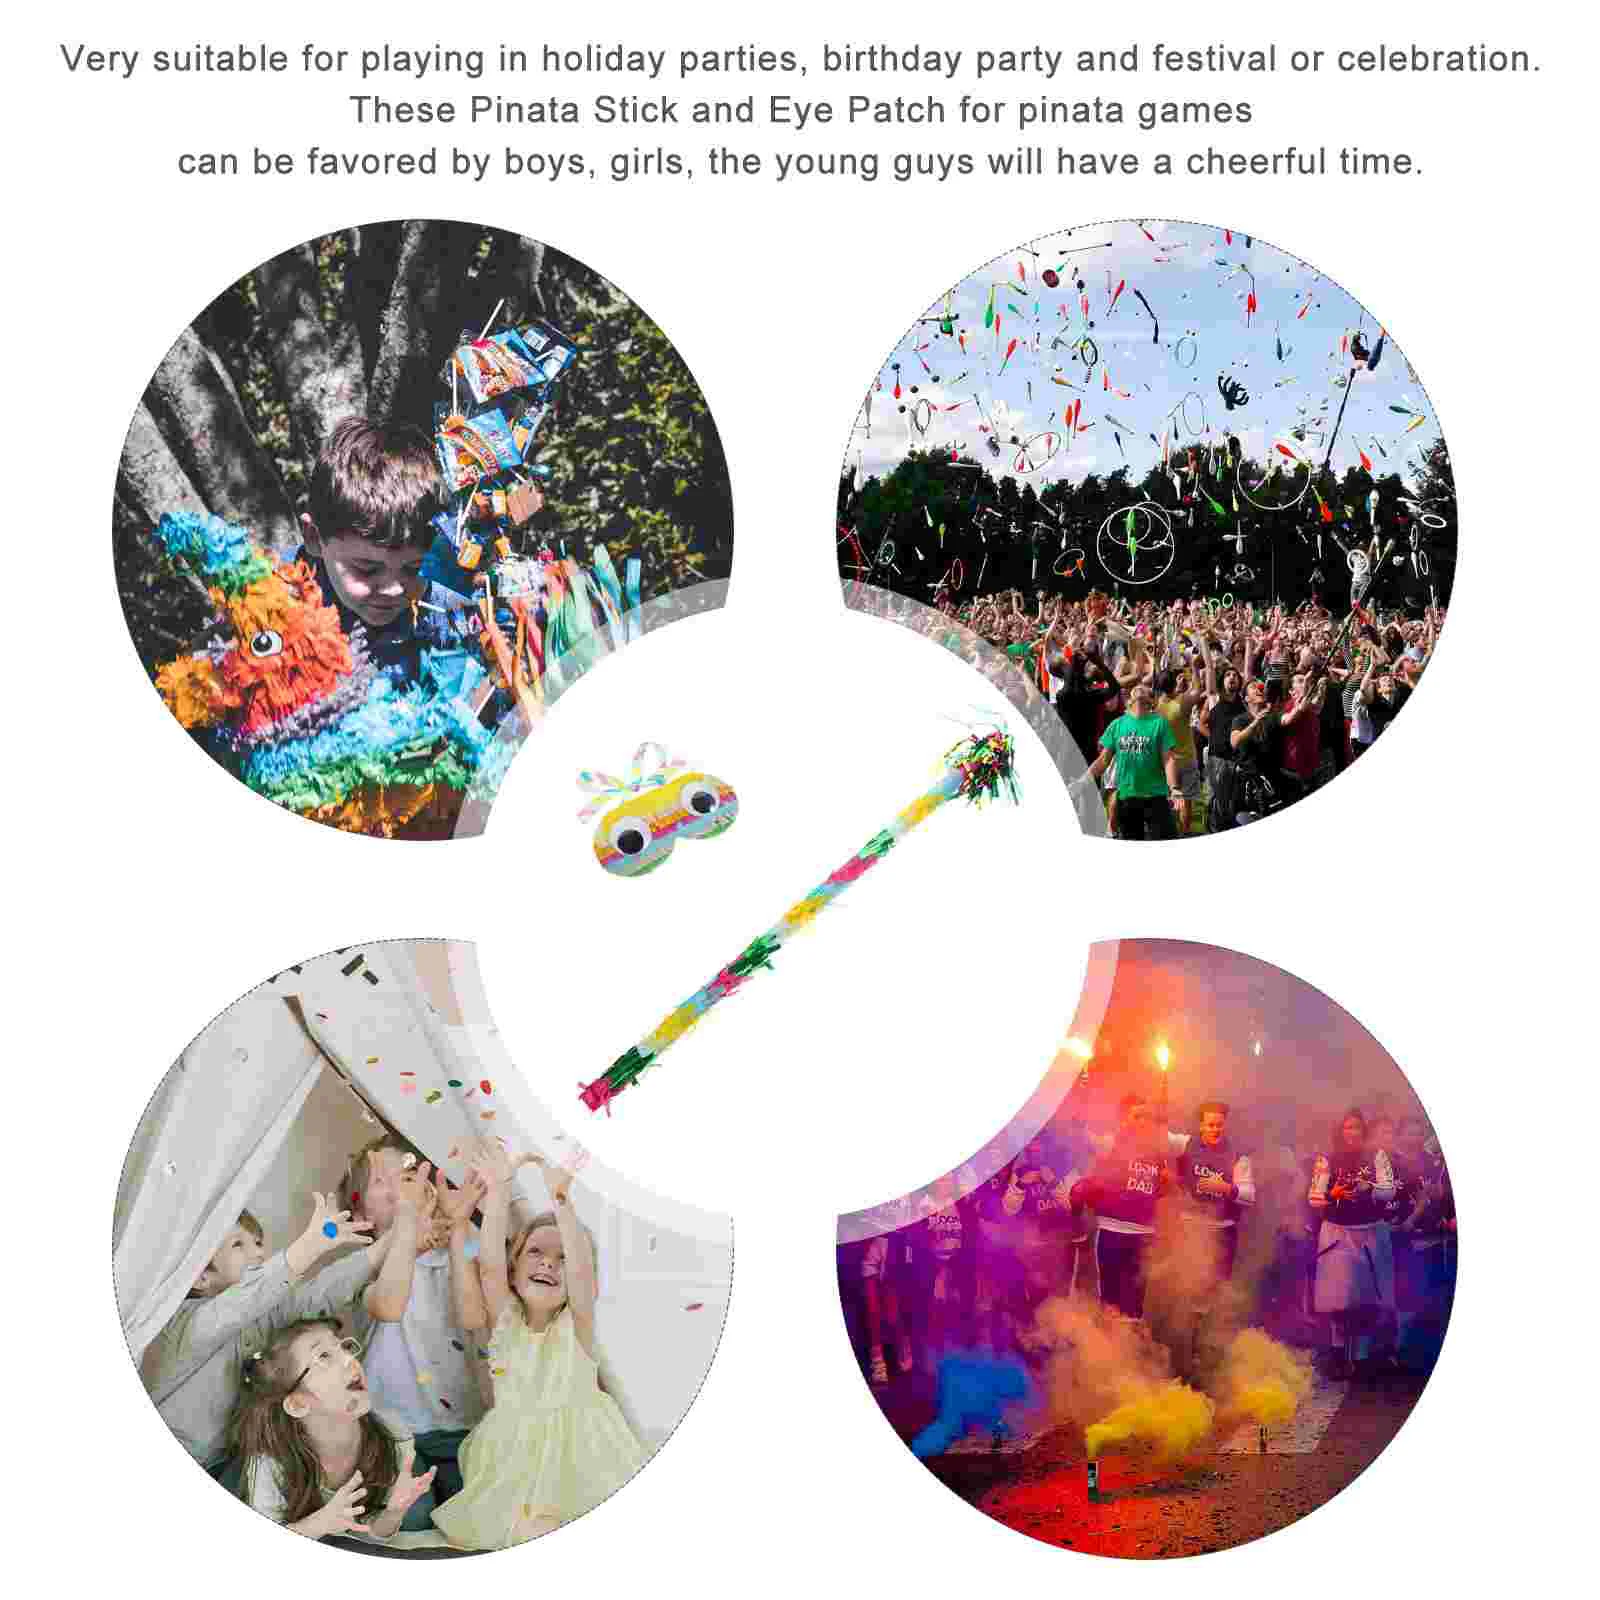 Pinata Toy Party Sticks Multicolored Decorate Prop Paper Kids Games Fun Birthday Celebration Decoration Child for Boys